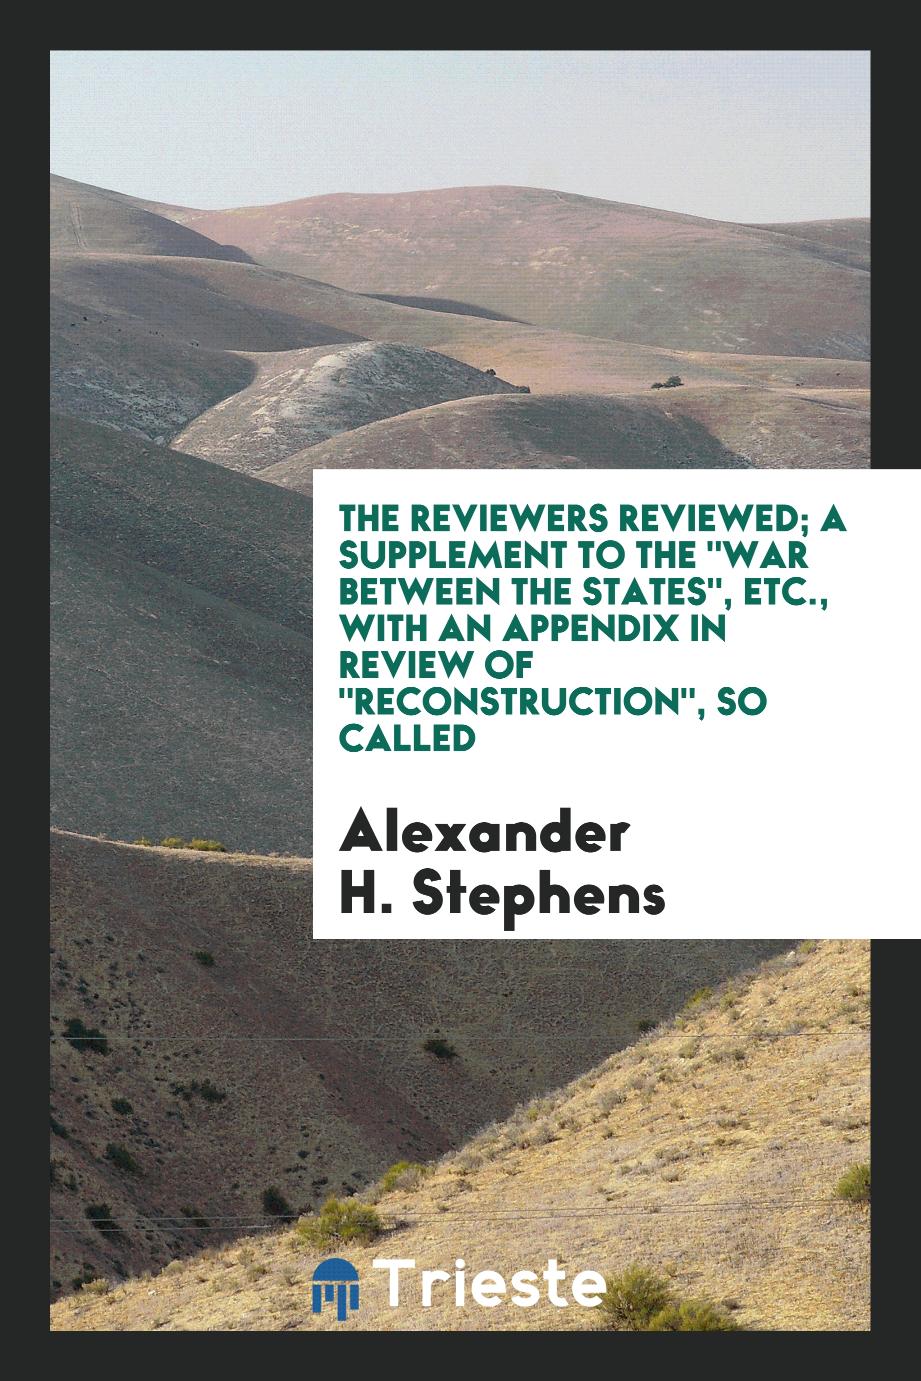 The reviewers reviewed; a supplement to the "War between the states", etc., with an appendix in review of "Reconstruction", so called